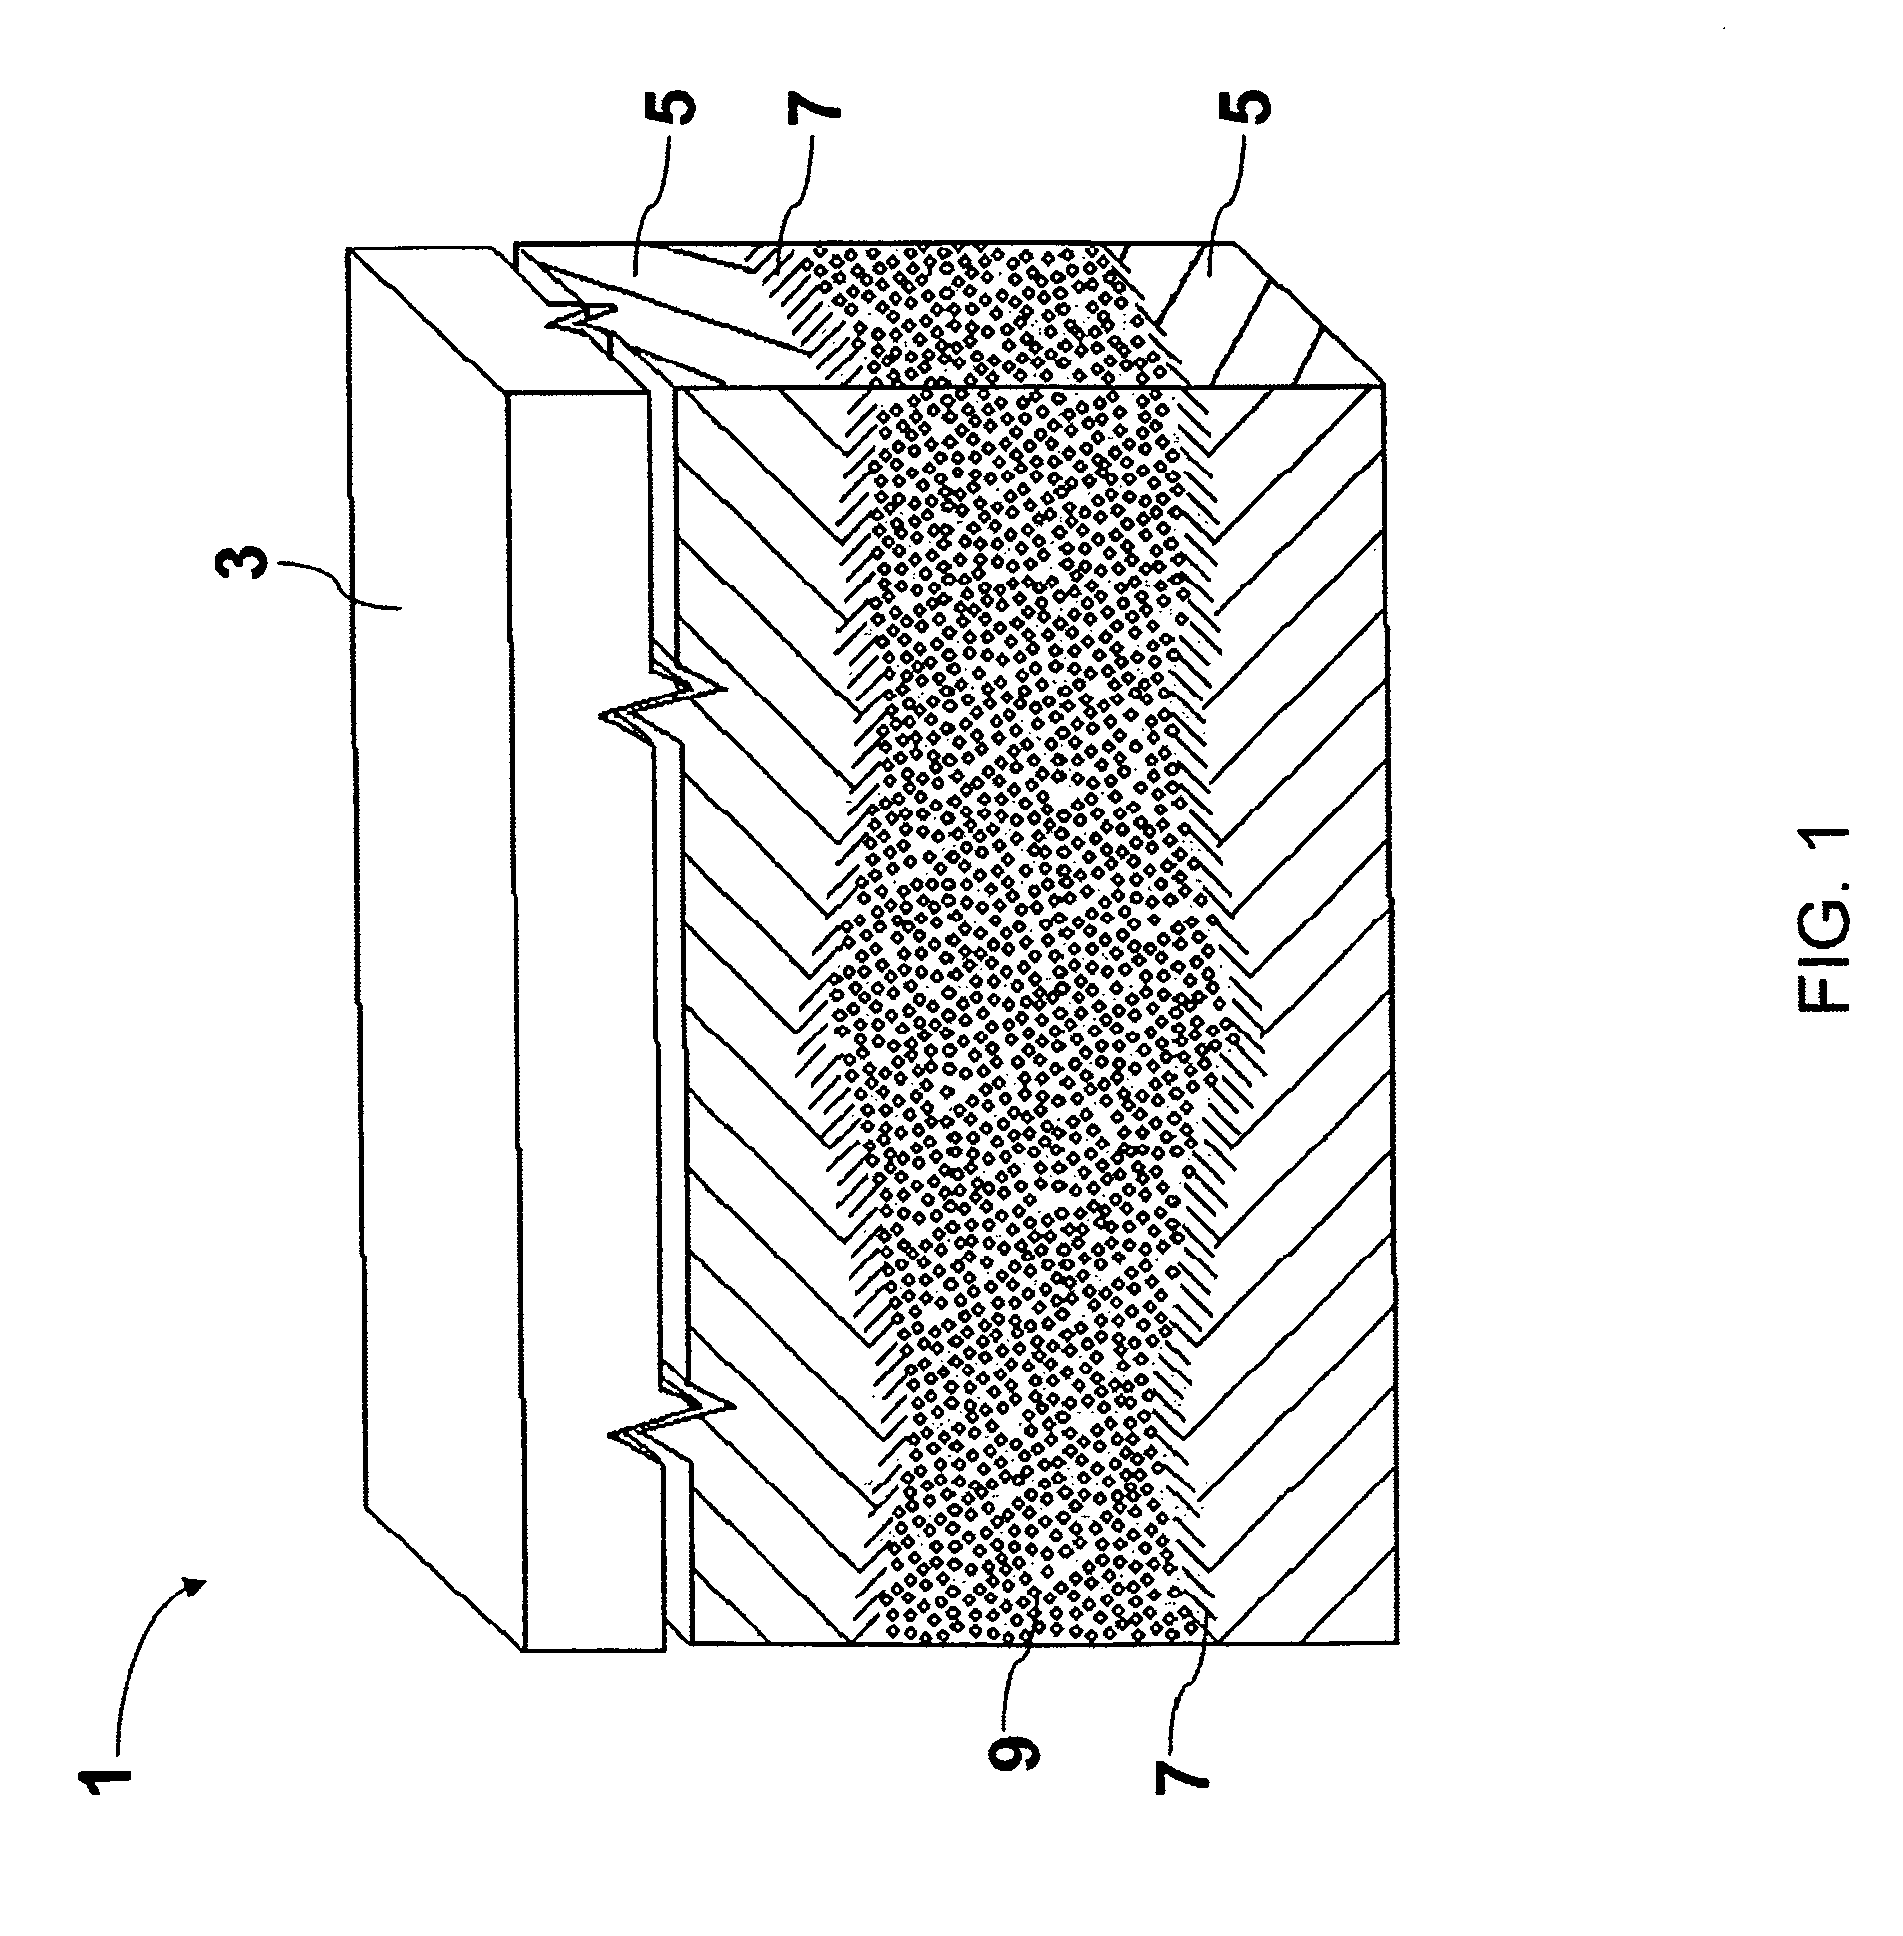 System and method for forecasting production from a hydrocarbon reservoir